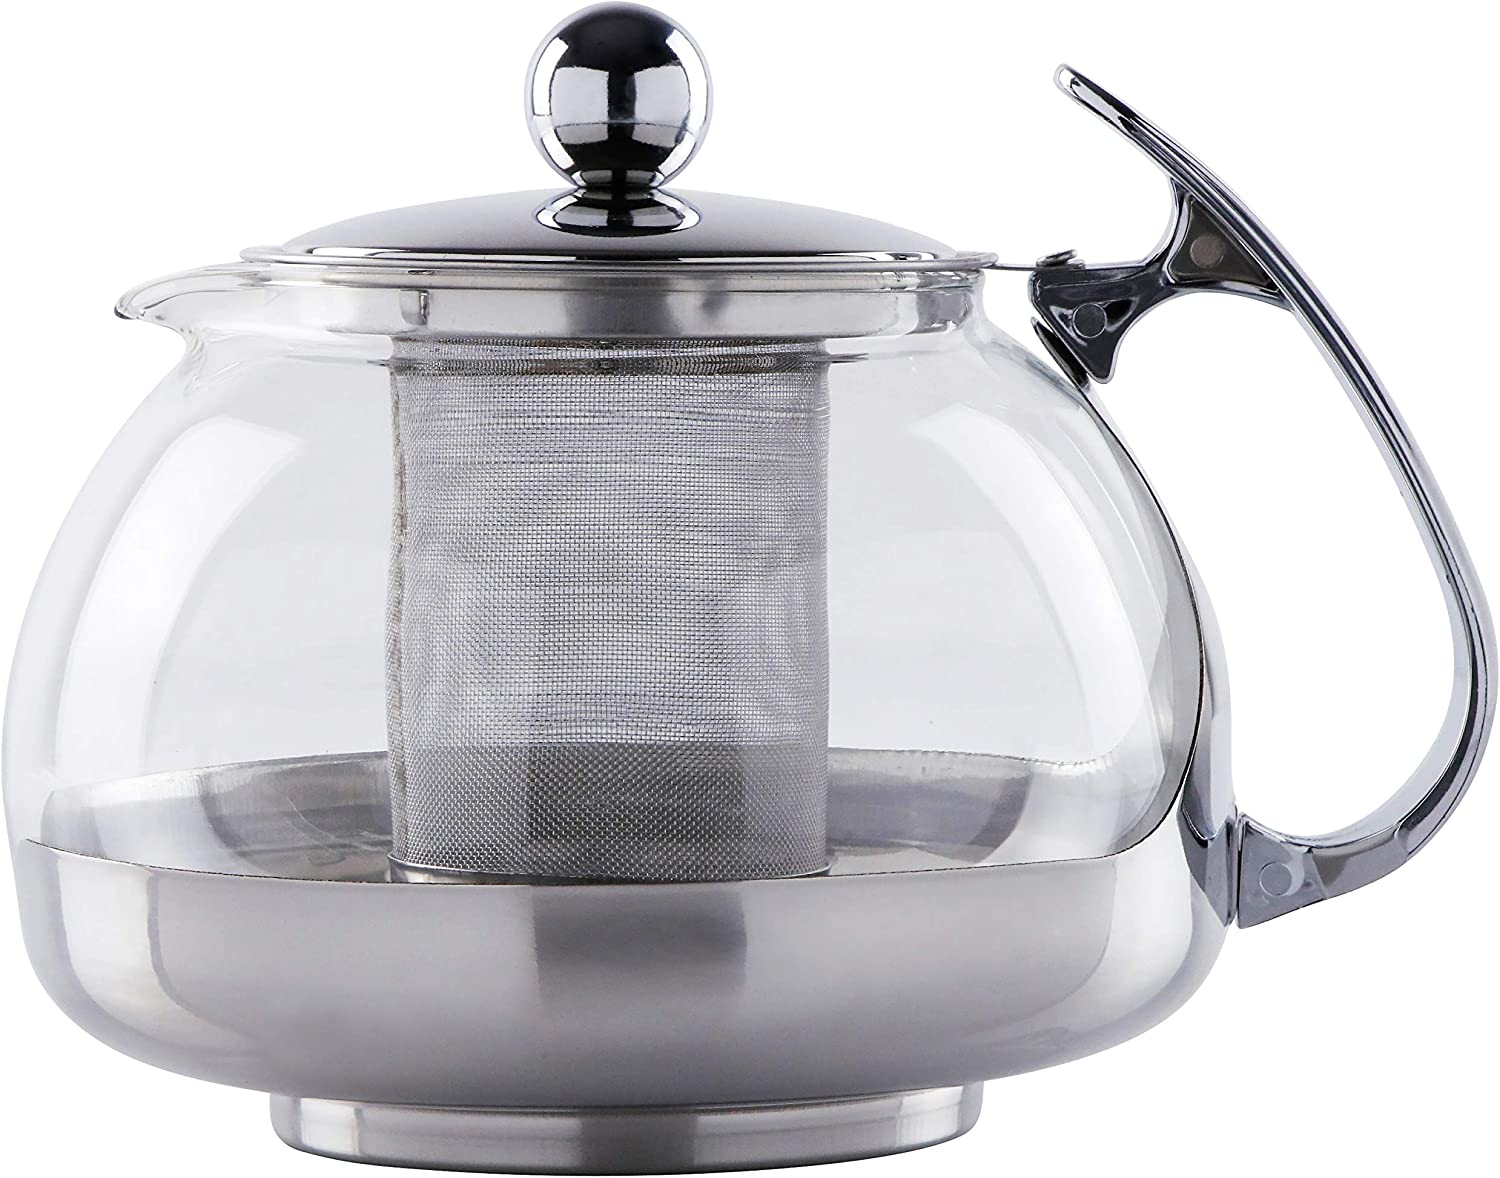 Trinkbasis Teapot made of heat-resistant glass for 1.2 litres (10-12 cups), includes lid and rust-proof Flexi stainless steel filter, tea jug for fresh preparation of loose tea